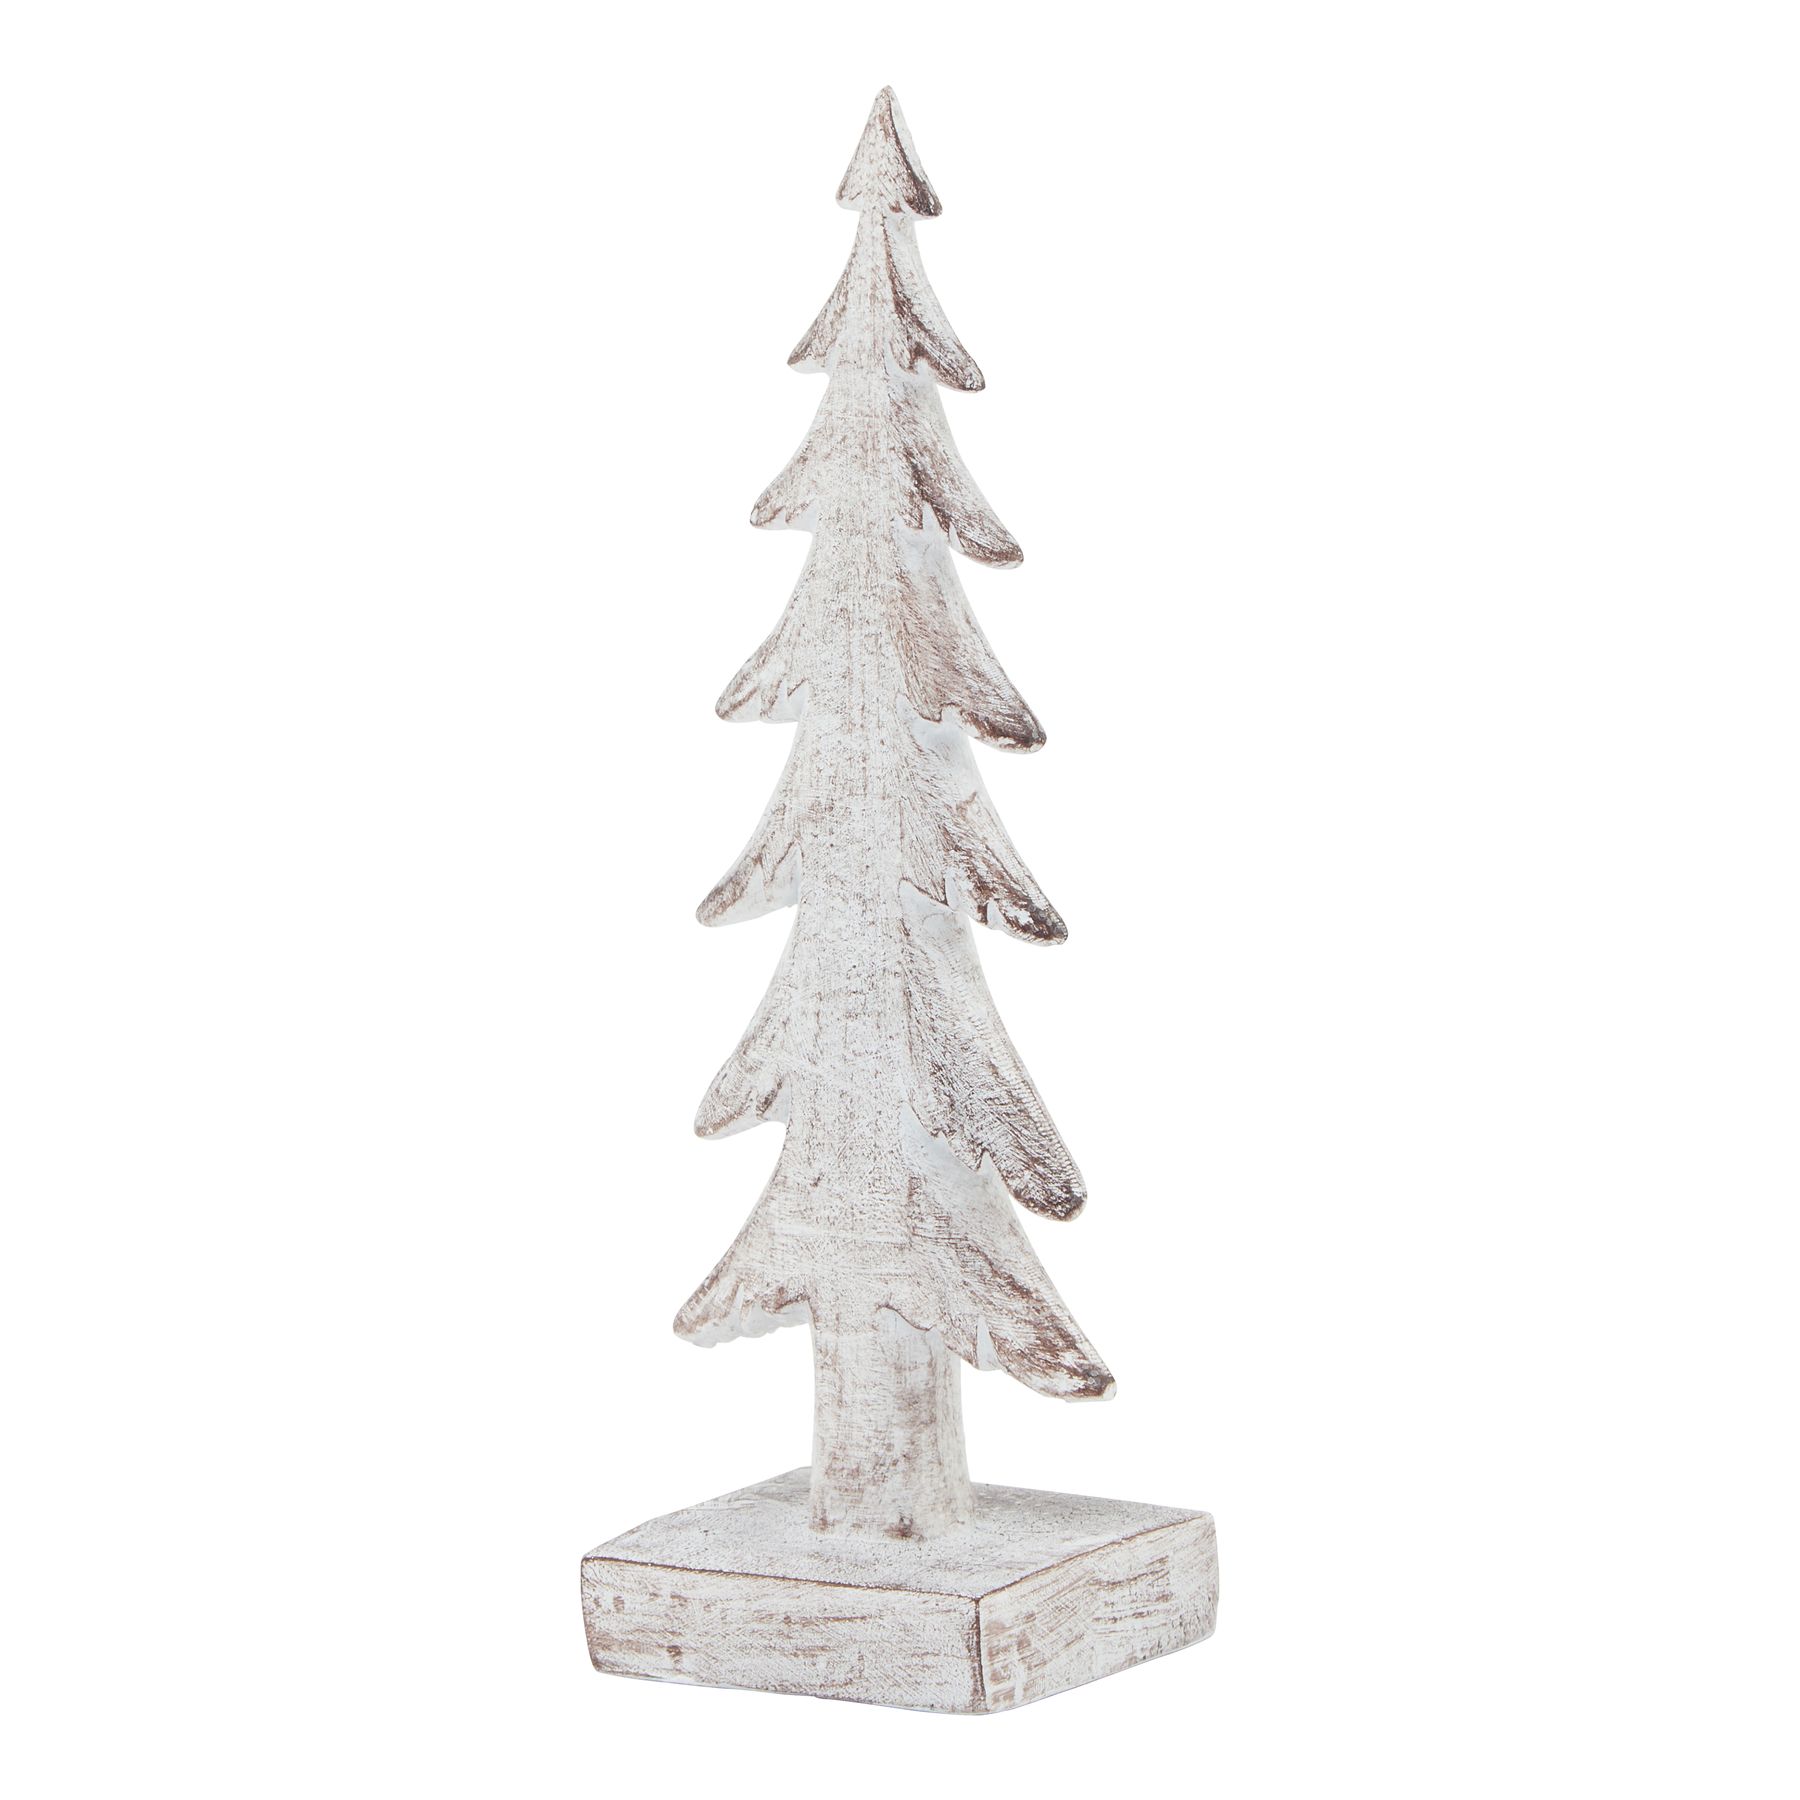 Small Snowy Forest Tree Sculpture - Image 1